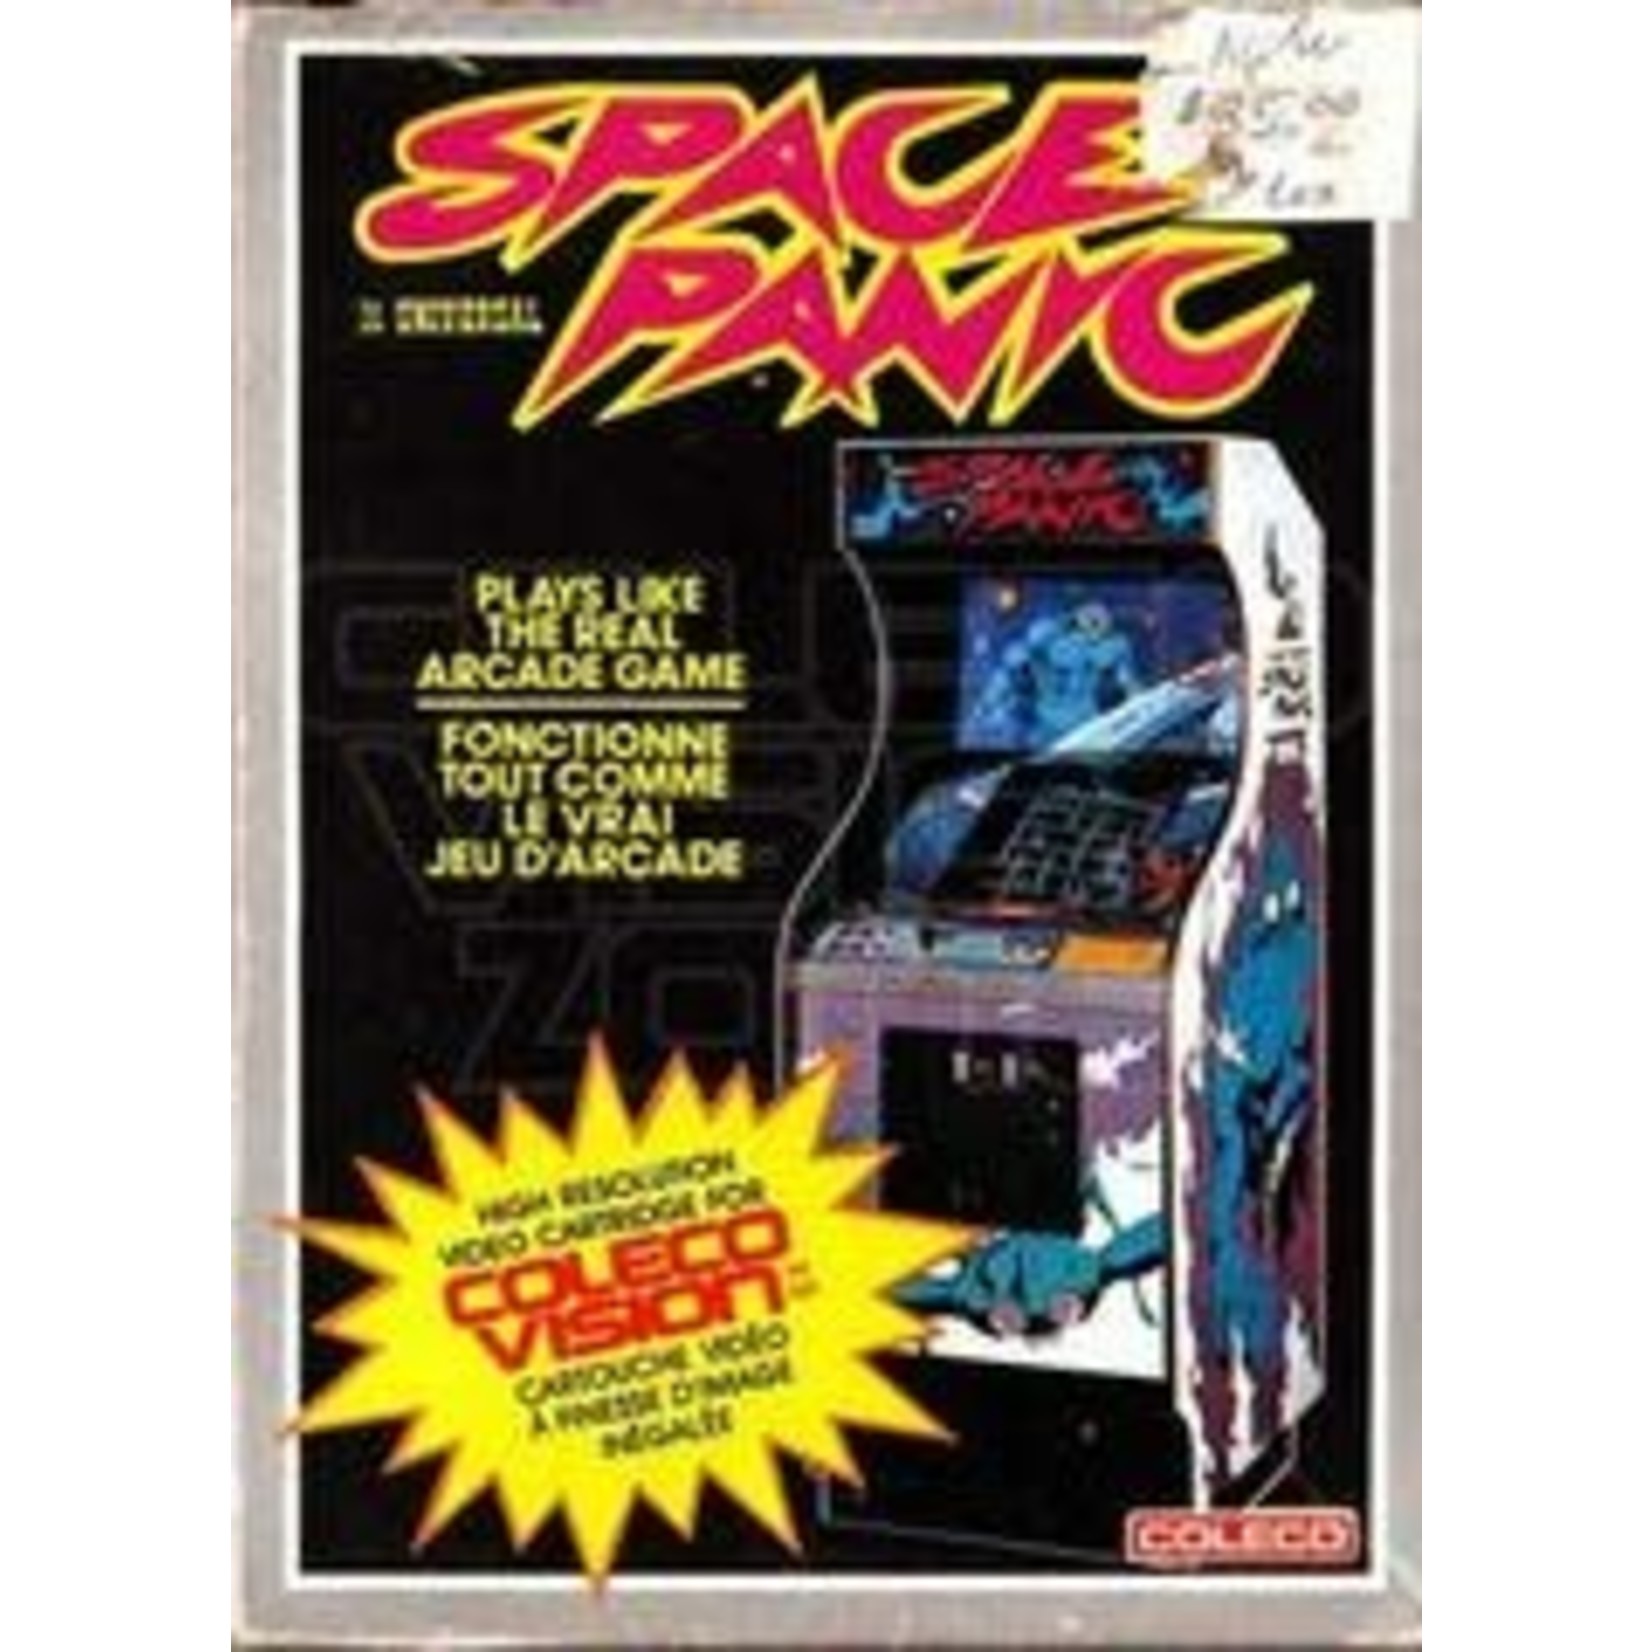 Colecovision Space Panic [Colecovision]